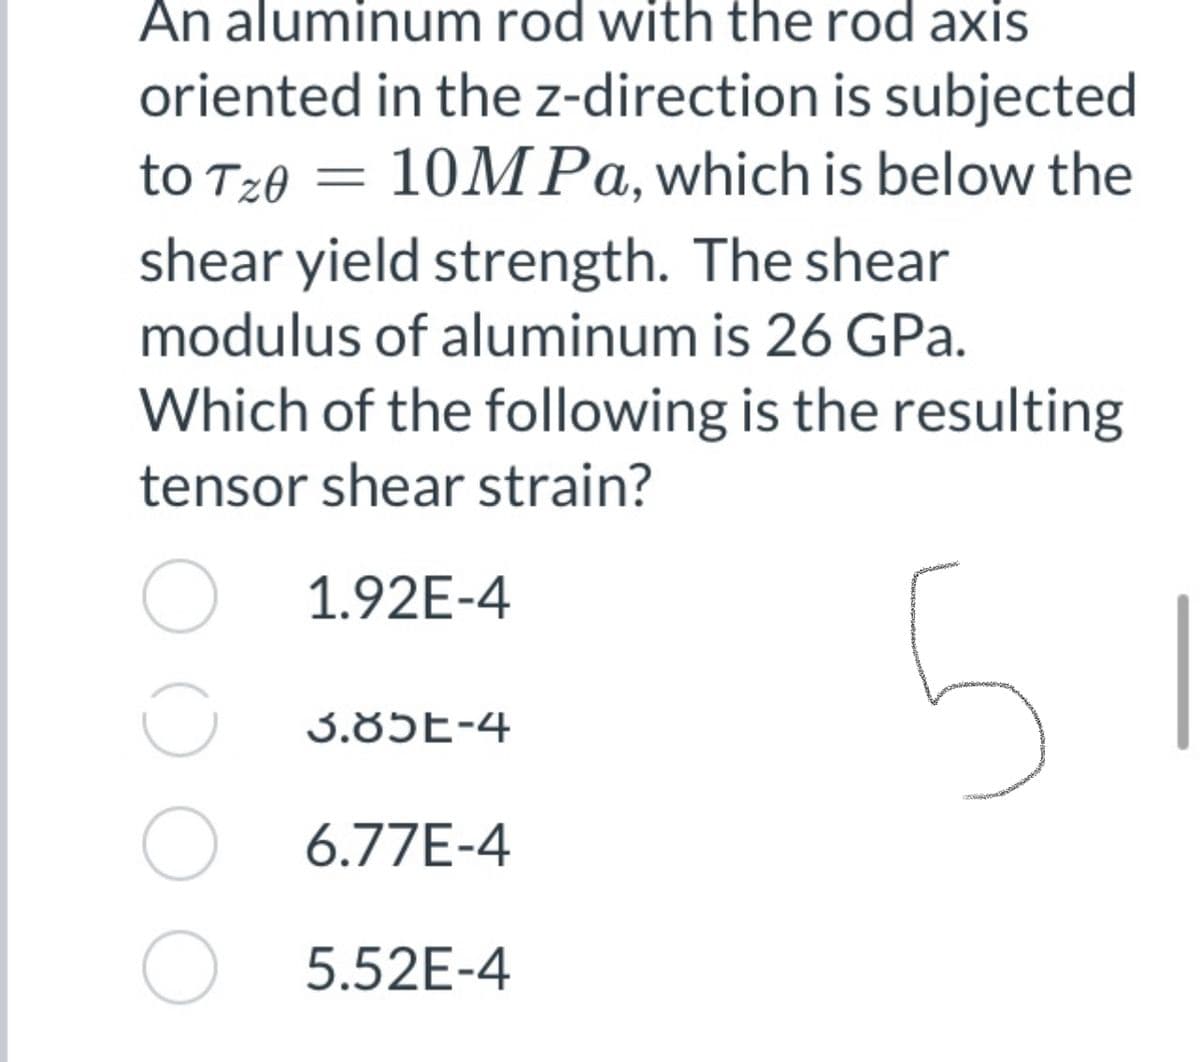 An aluminum rod with the rod axis
oriented in the z-direction is subjected
to T20 = 10M Pa,which is below the
shear yield strength. The shear
modulus of aluminum is 26 GPa.
Which of the following is the resulting
tensor shear strain?
1.92E-4
U 3.85E-4
6.77E-4
O 5.52E-4
